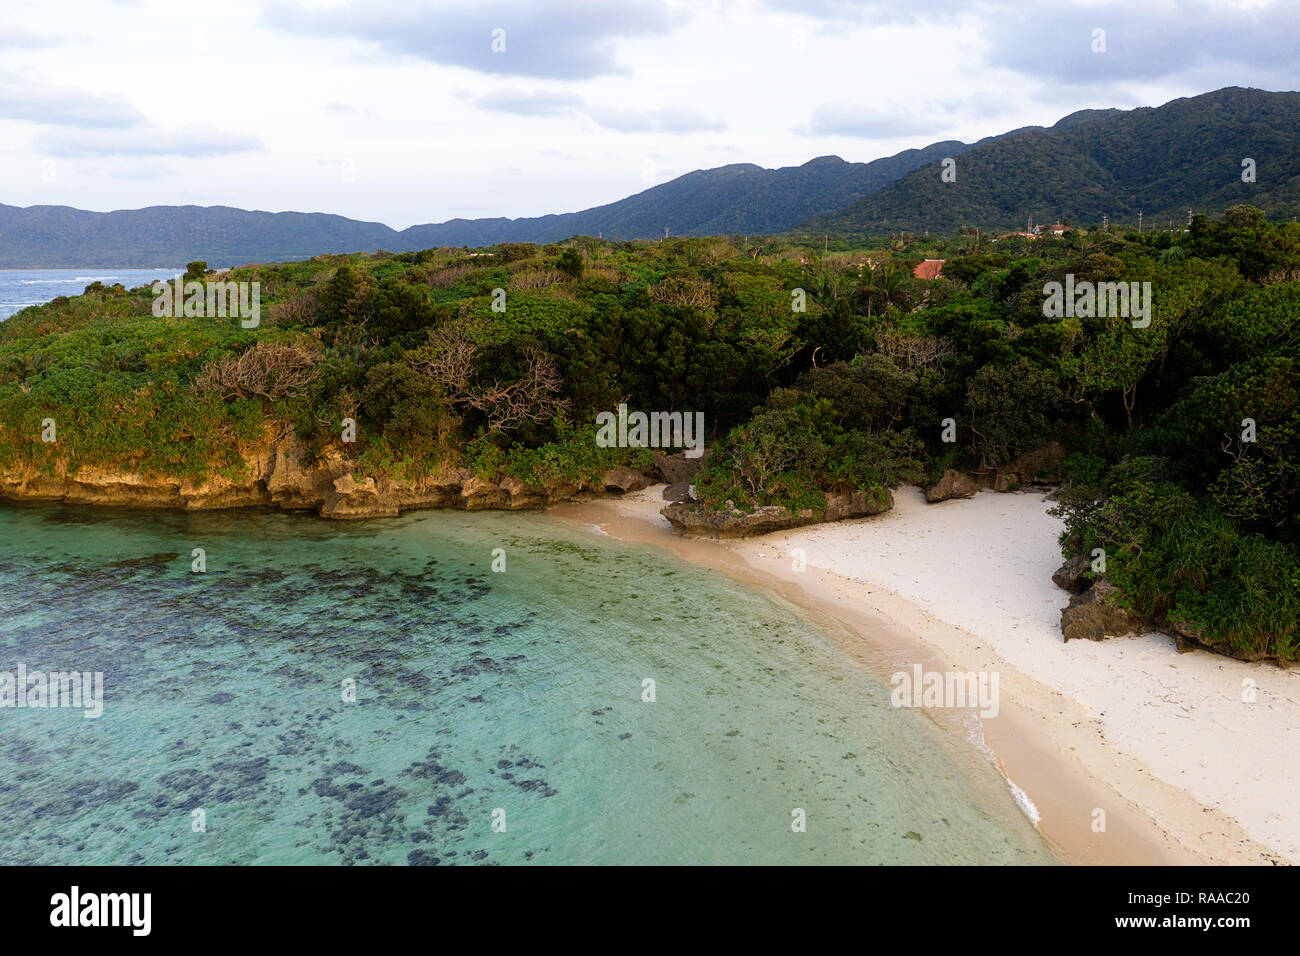 Aerial view over unique tropical island with mountains, secluded white ...